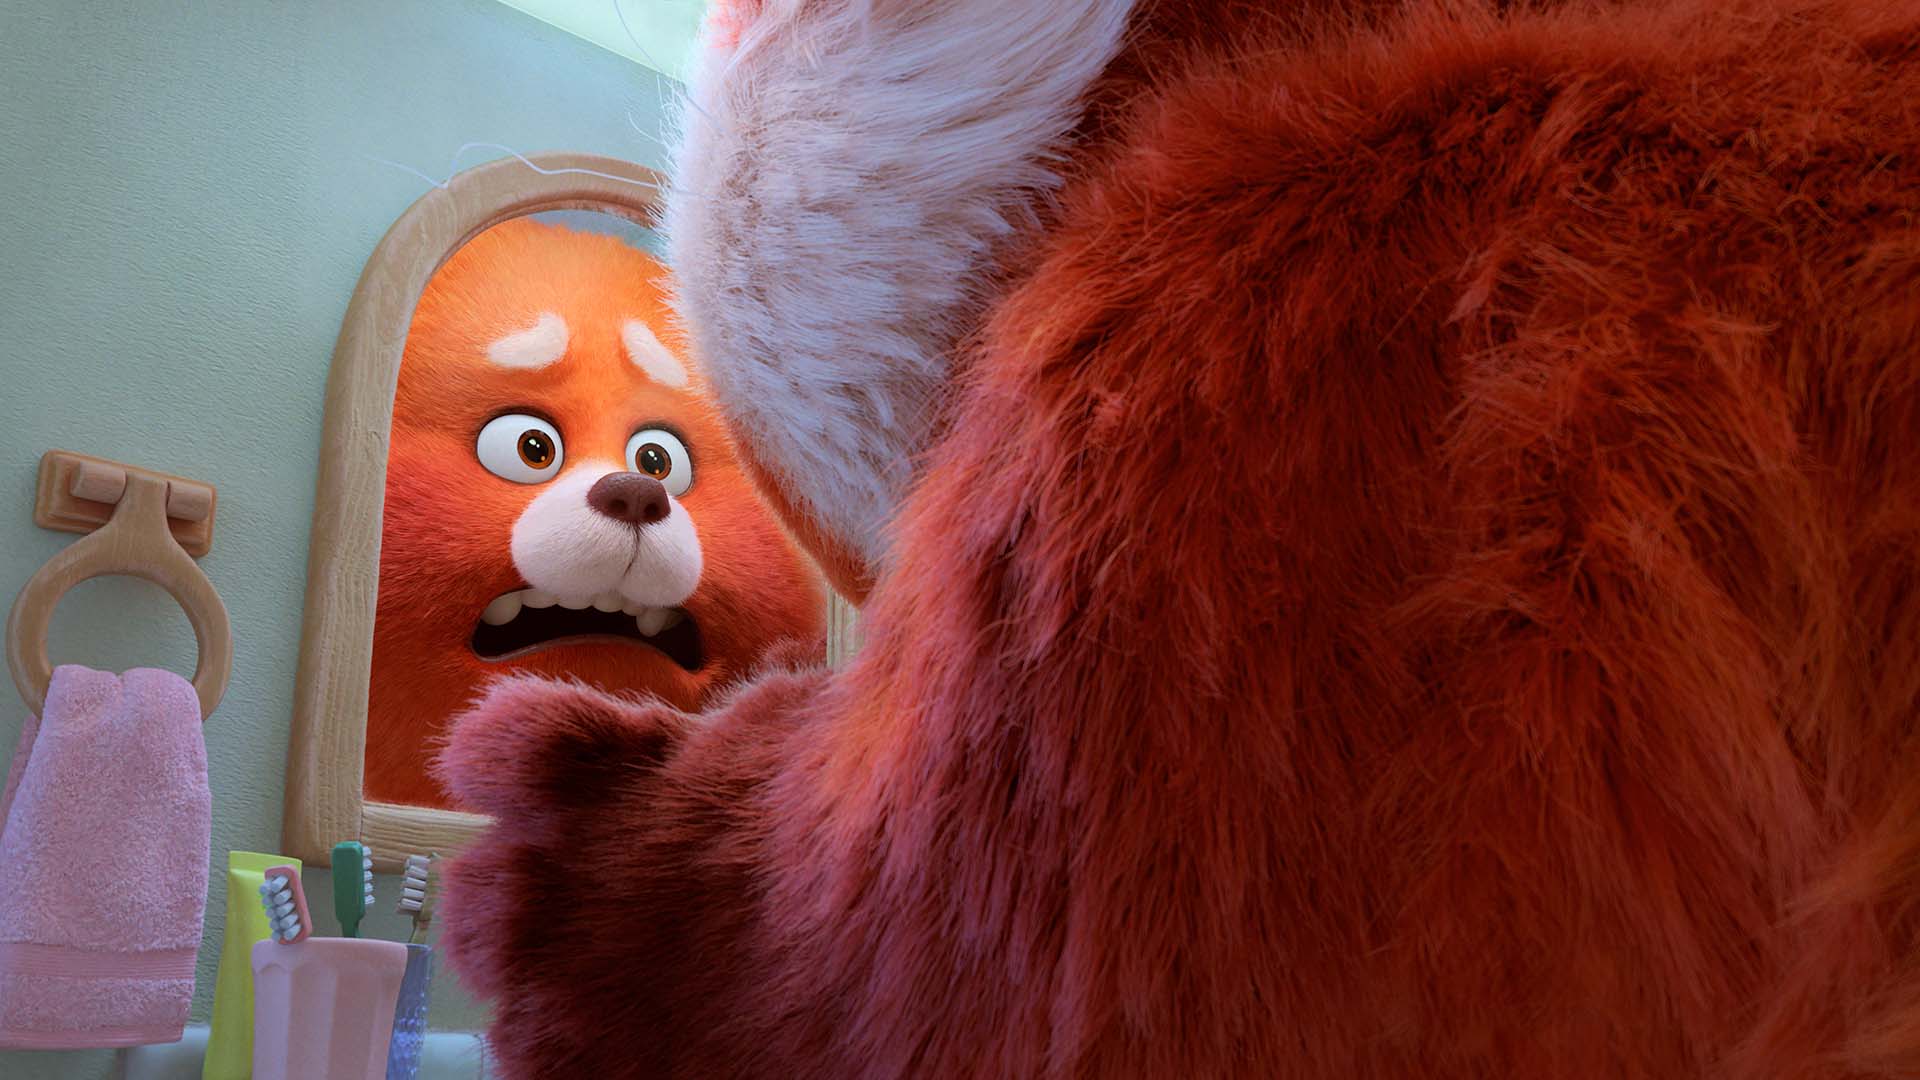 Pixar's Next Movie 'Turning Red' Follows a Teen Who Becomes a Red Panda When She's Excited